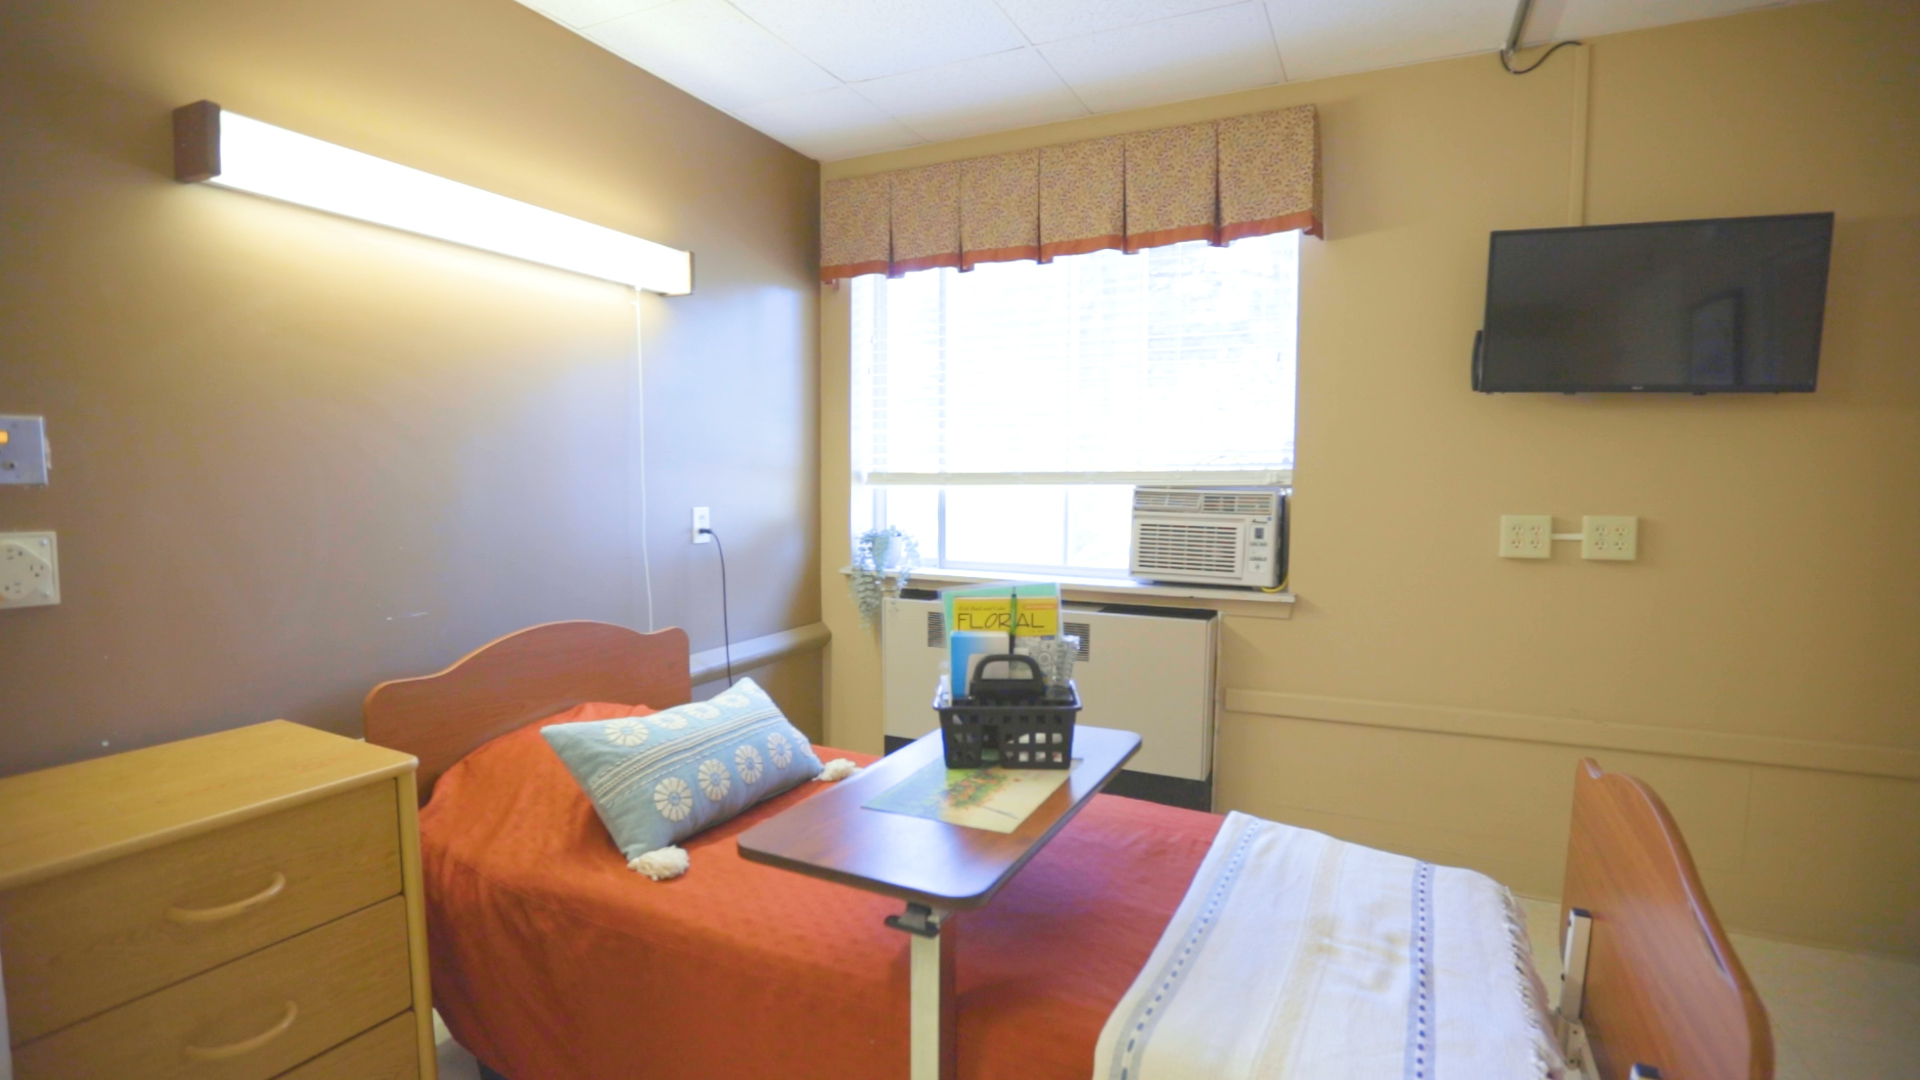 Room with one bed and bed table and television on the wall.